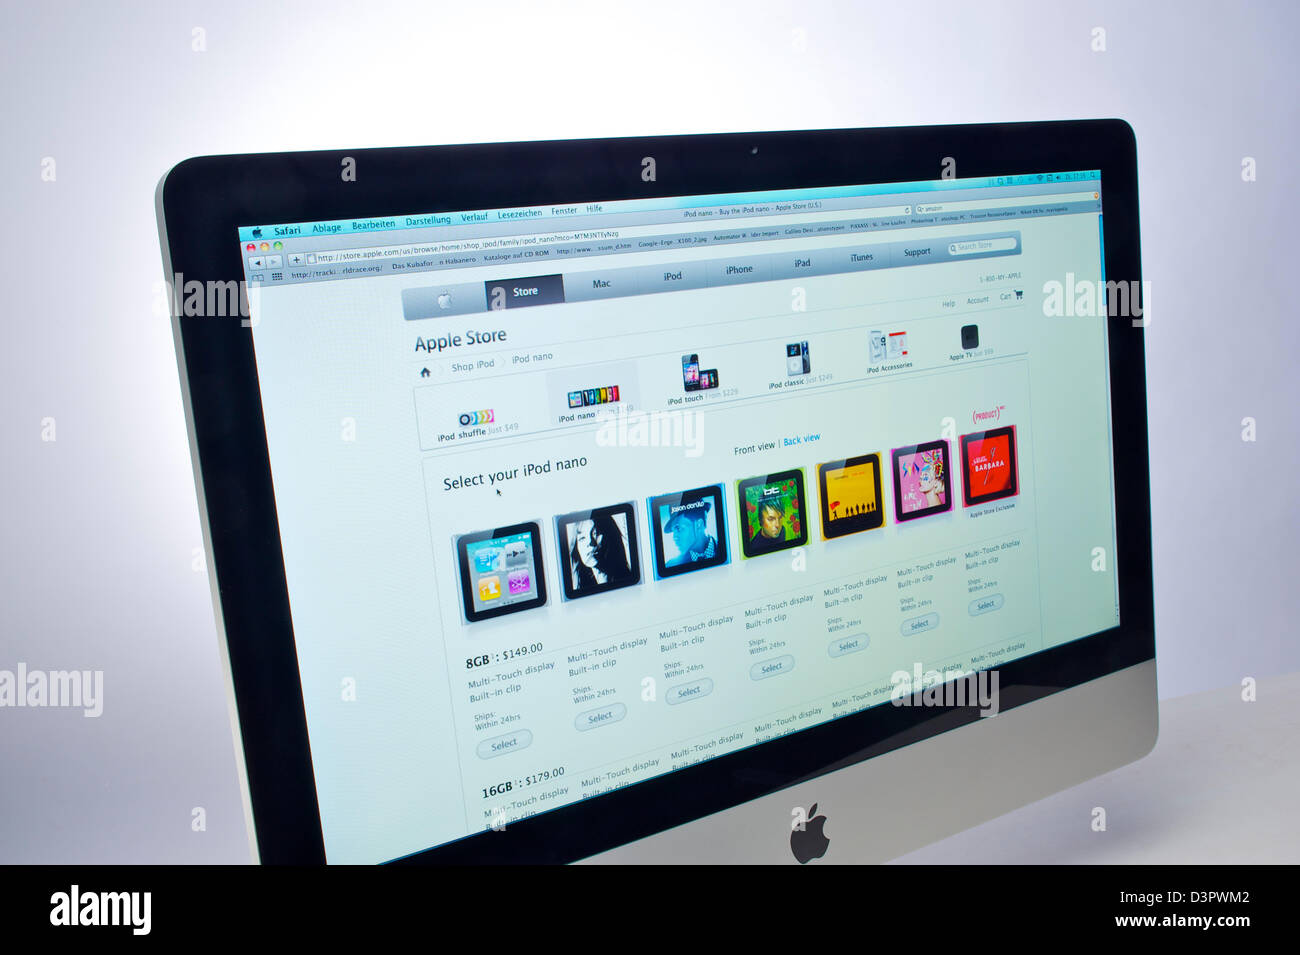 Hamburg, Germany, sales of the iPod nano at the Apple Store on the Apple website Stock Photo